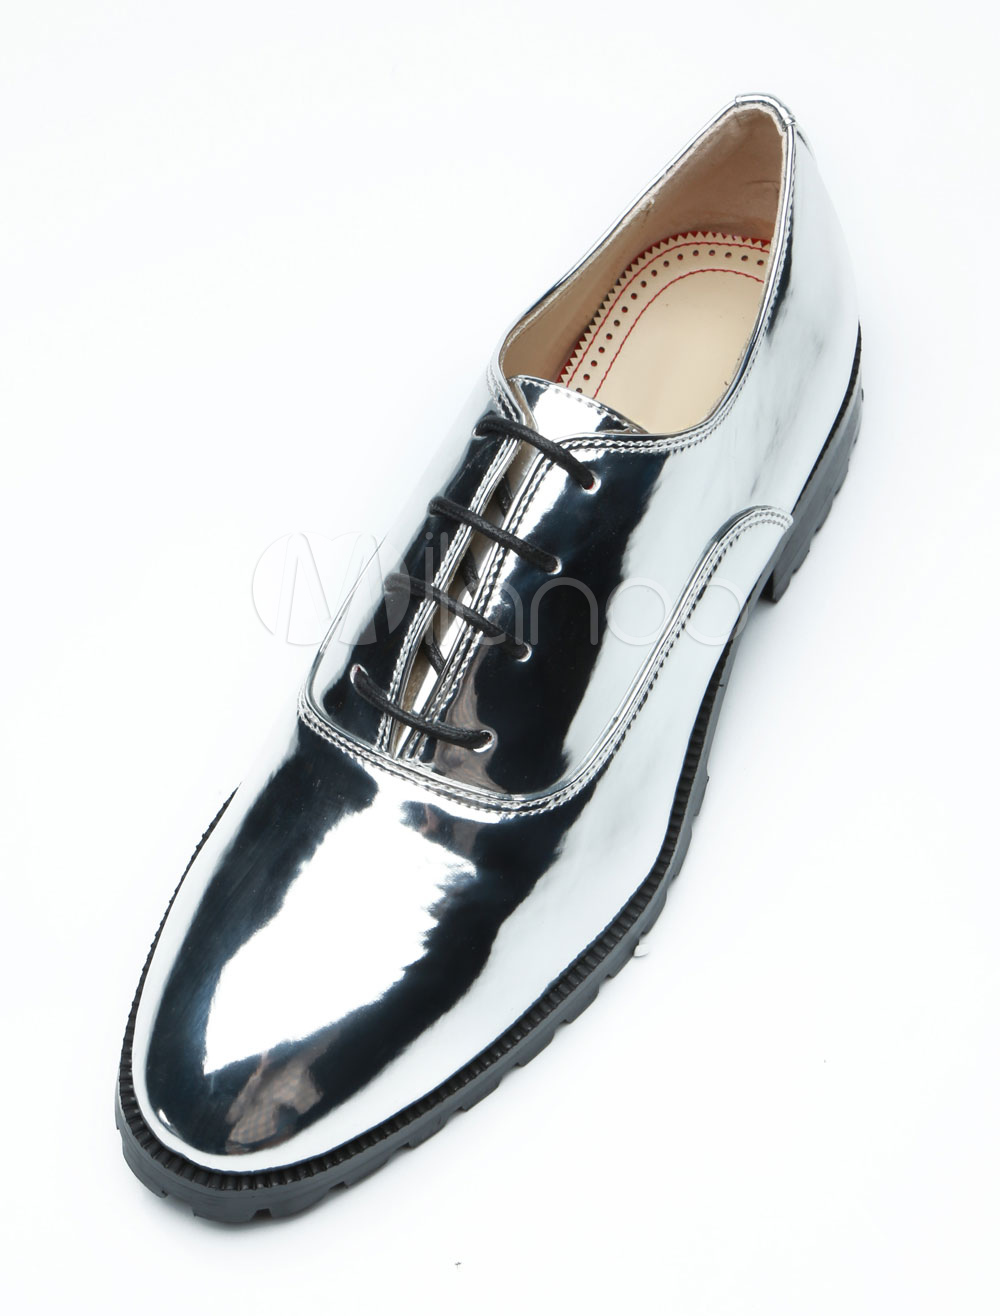 Silver Oxford Shoes Men Dress Shoes Round Toe Lace Up